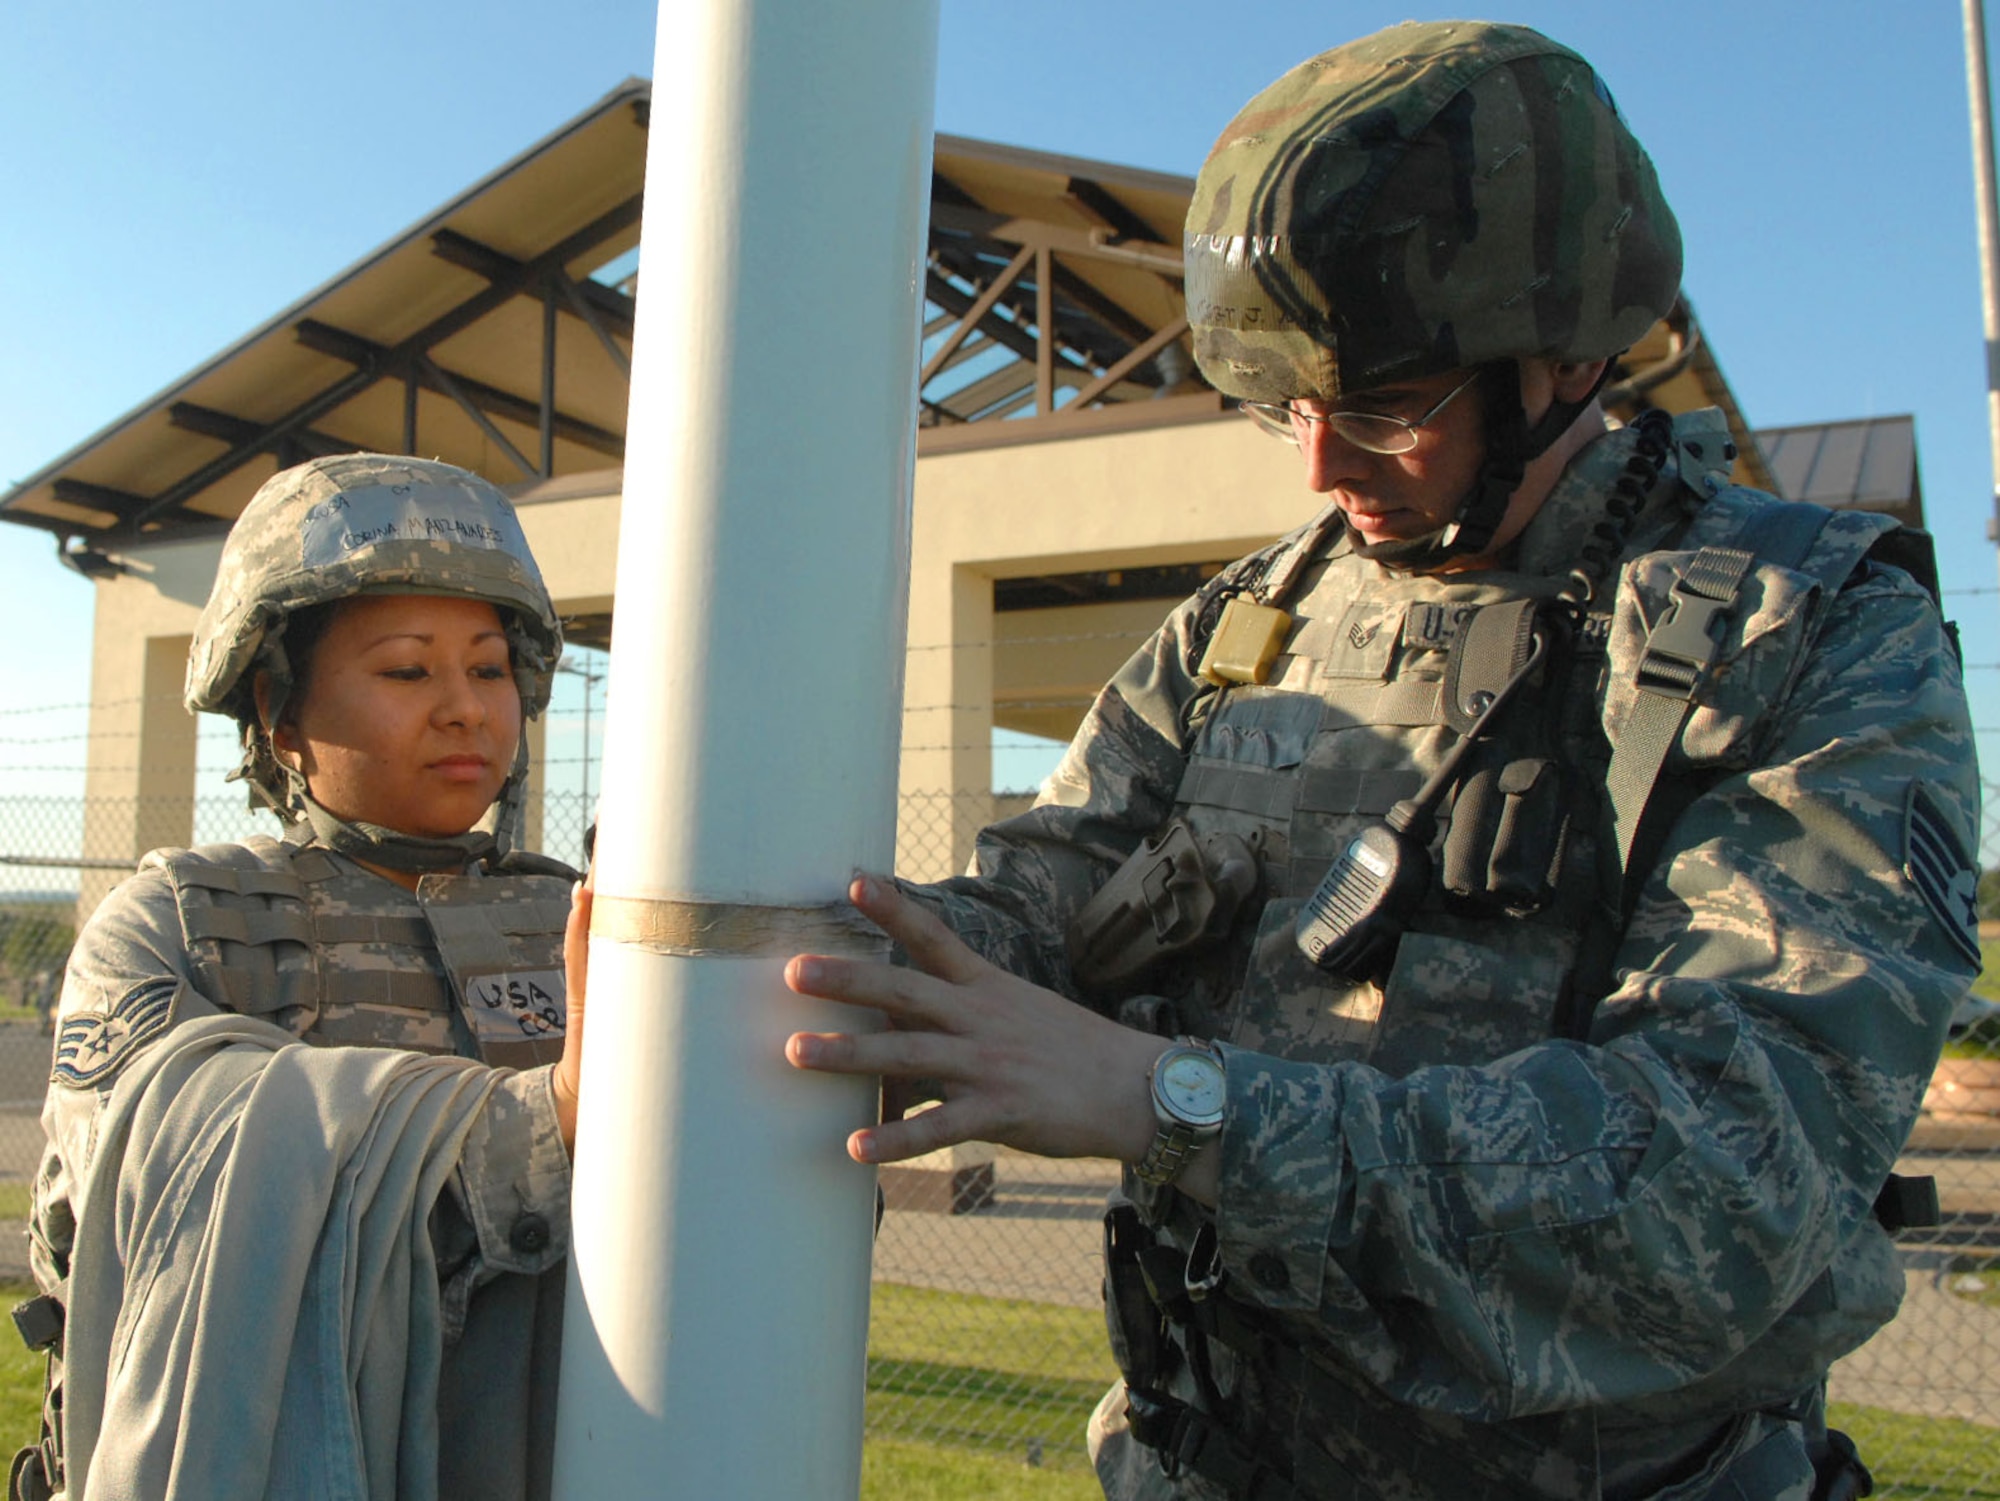 SPANGDAHLEM AIR BASE, Germany -- Staff Sgt. Corina Manzanares and Staff Sgt. Joseph Null, 52nd Security Forces Squadron, tighten the rope of a U.S. Air Forces in Europe communication flag at the front gate Aug. 4 during a base wide exercise in preparation of a NATO Tactical Evaluation scheduled for 2010. USAFE headquarters periodically orders Airmen to raise a colored flag as part of a force protection measure to evaluate base response times. (U.S. Air Force photo/ Airman 1st Class Nick Wilson)